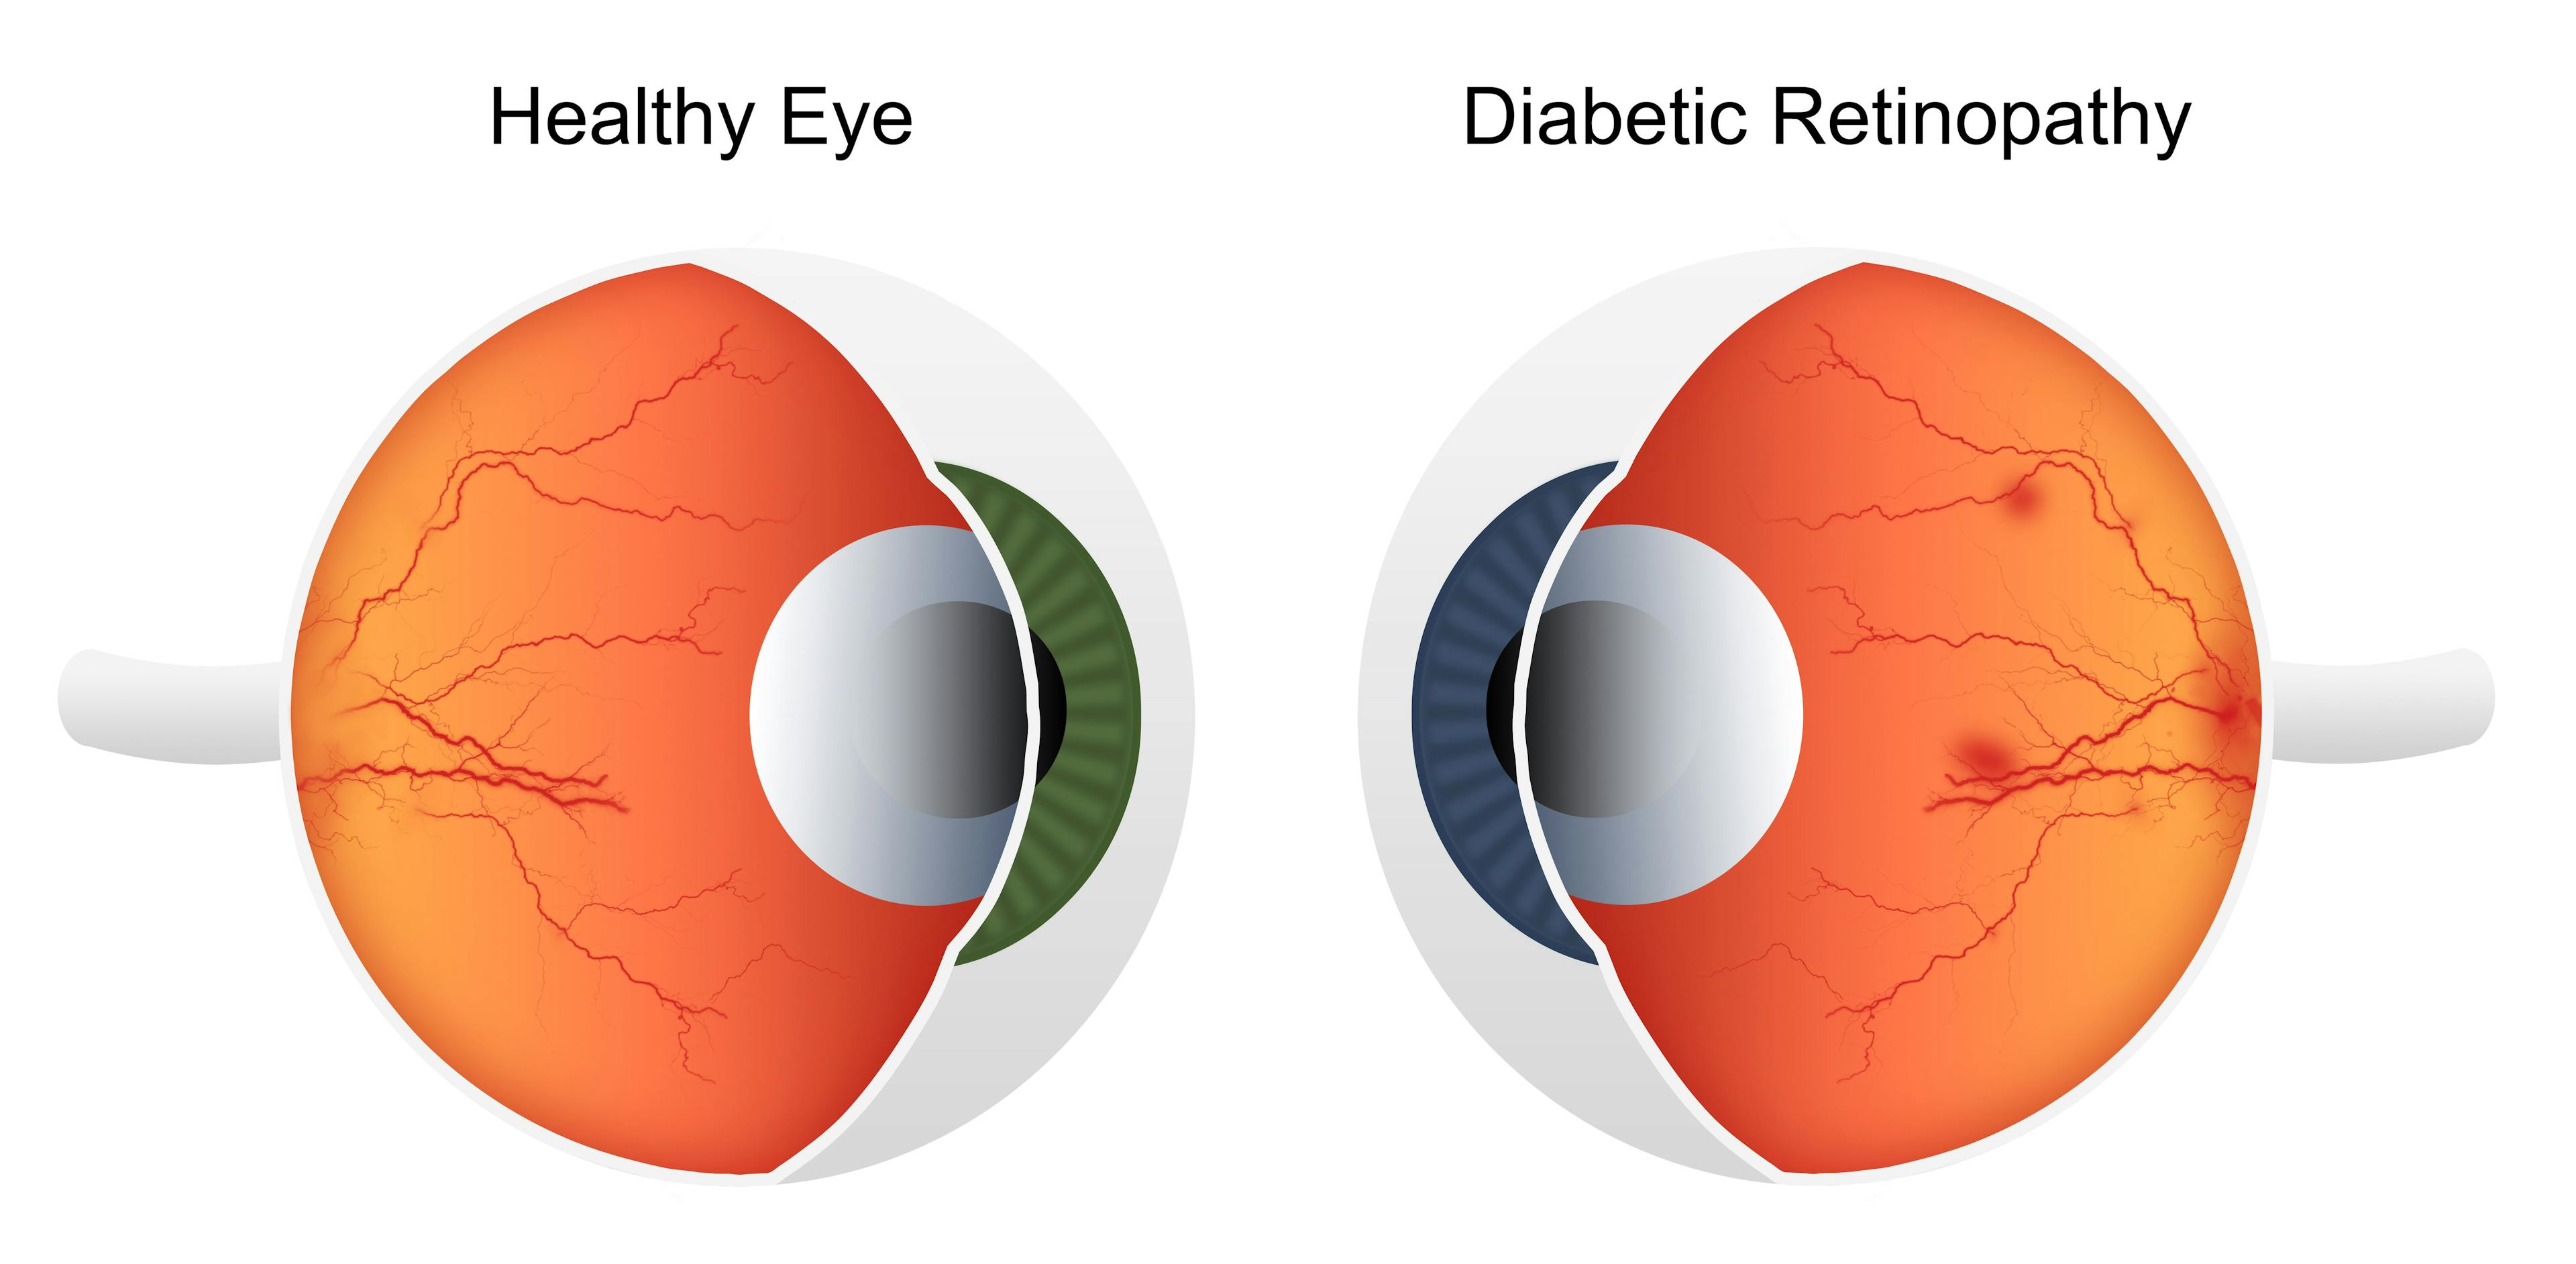 1 in 4 Patients With Diabetes Have Diabetic Retinopathy, Study Funds